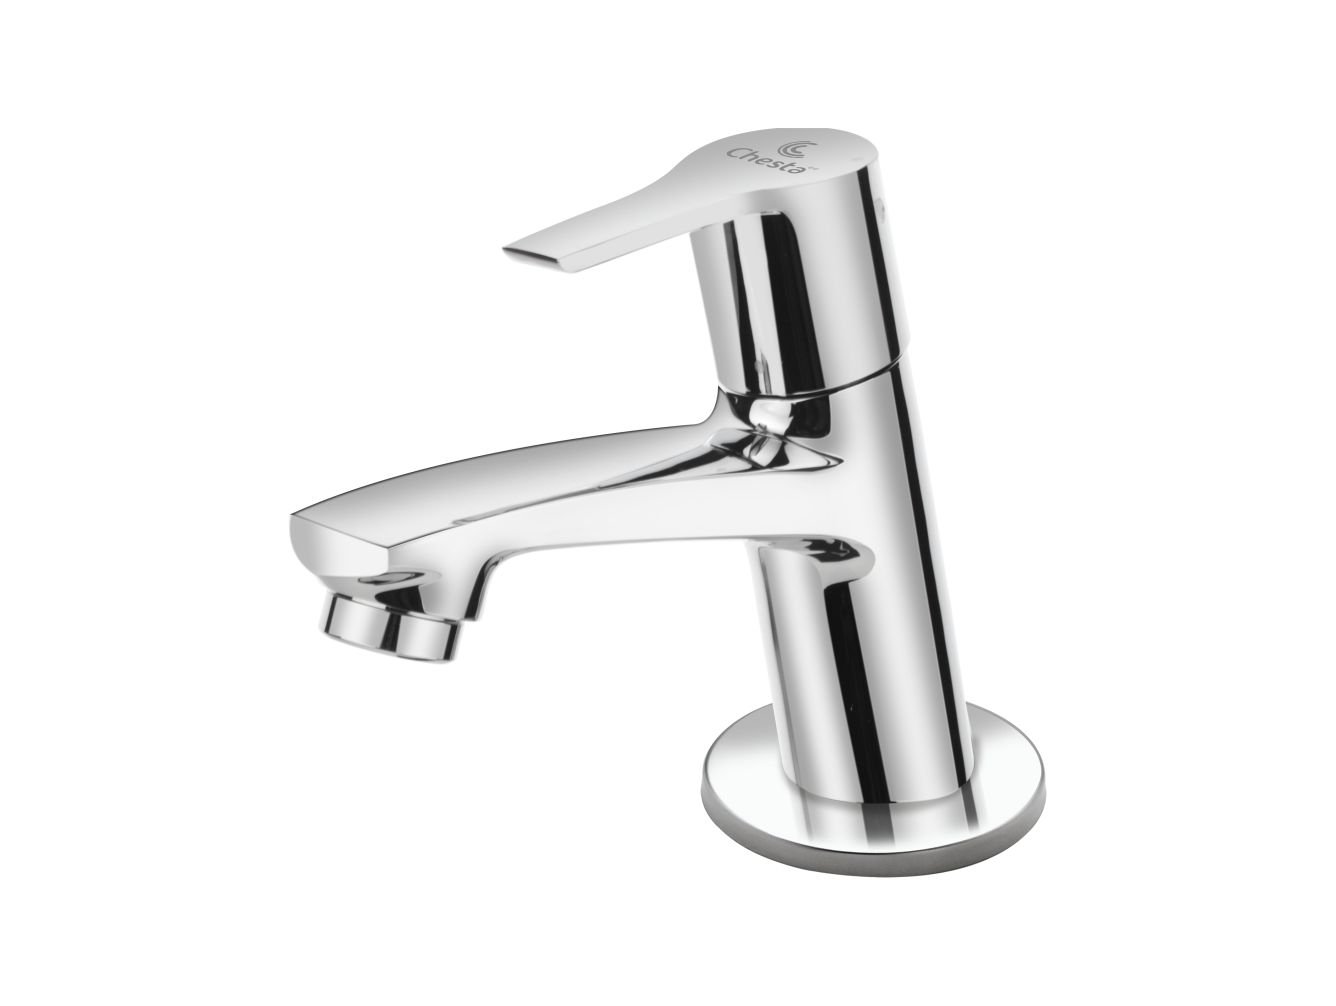 DY - 1005 - Pillar Cock with Flange by Chesta Bath